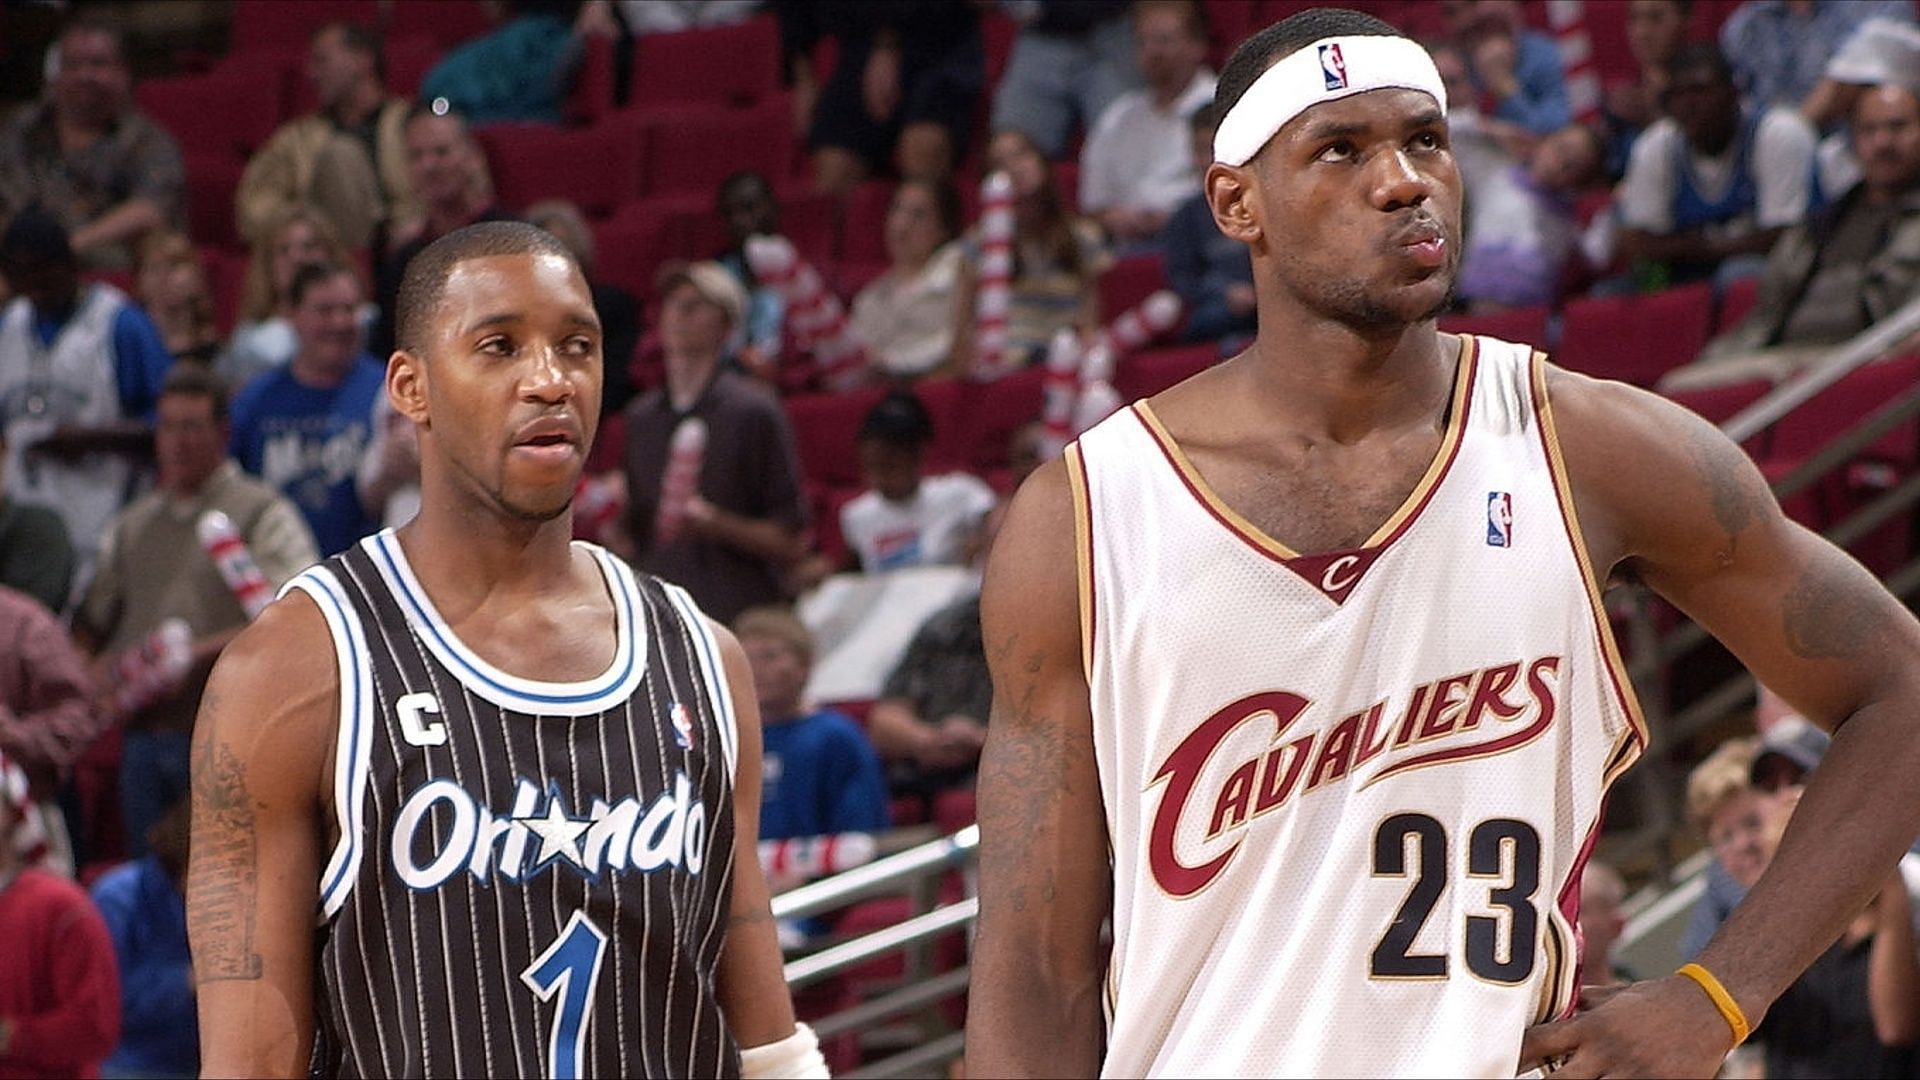 Tracy McGrady of the Orlando Magic against LeBron James of the Cleveland Cavaliers in 2003